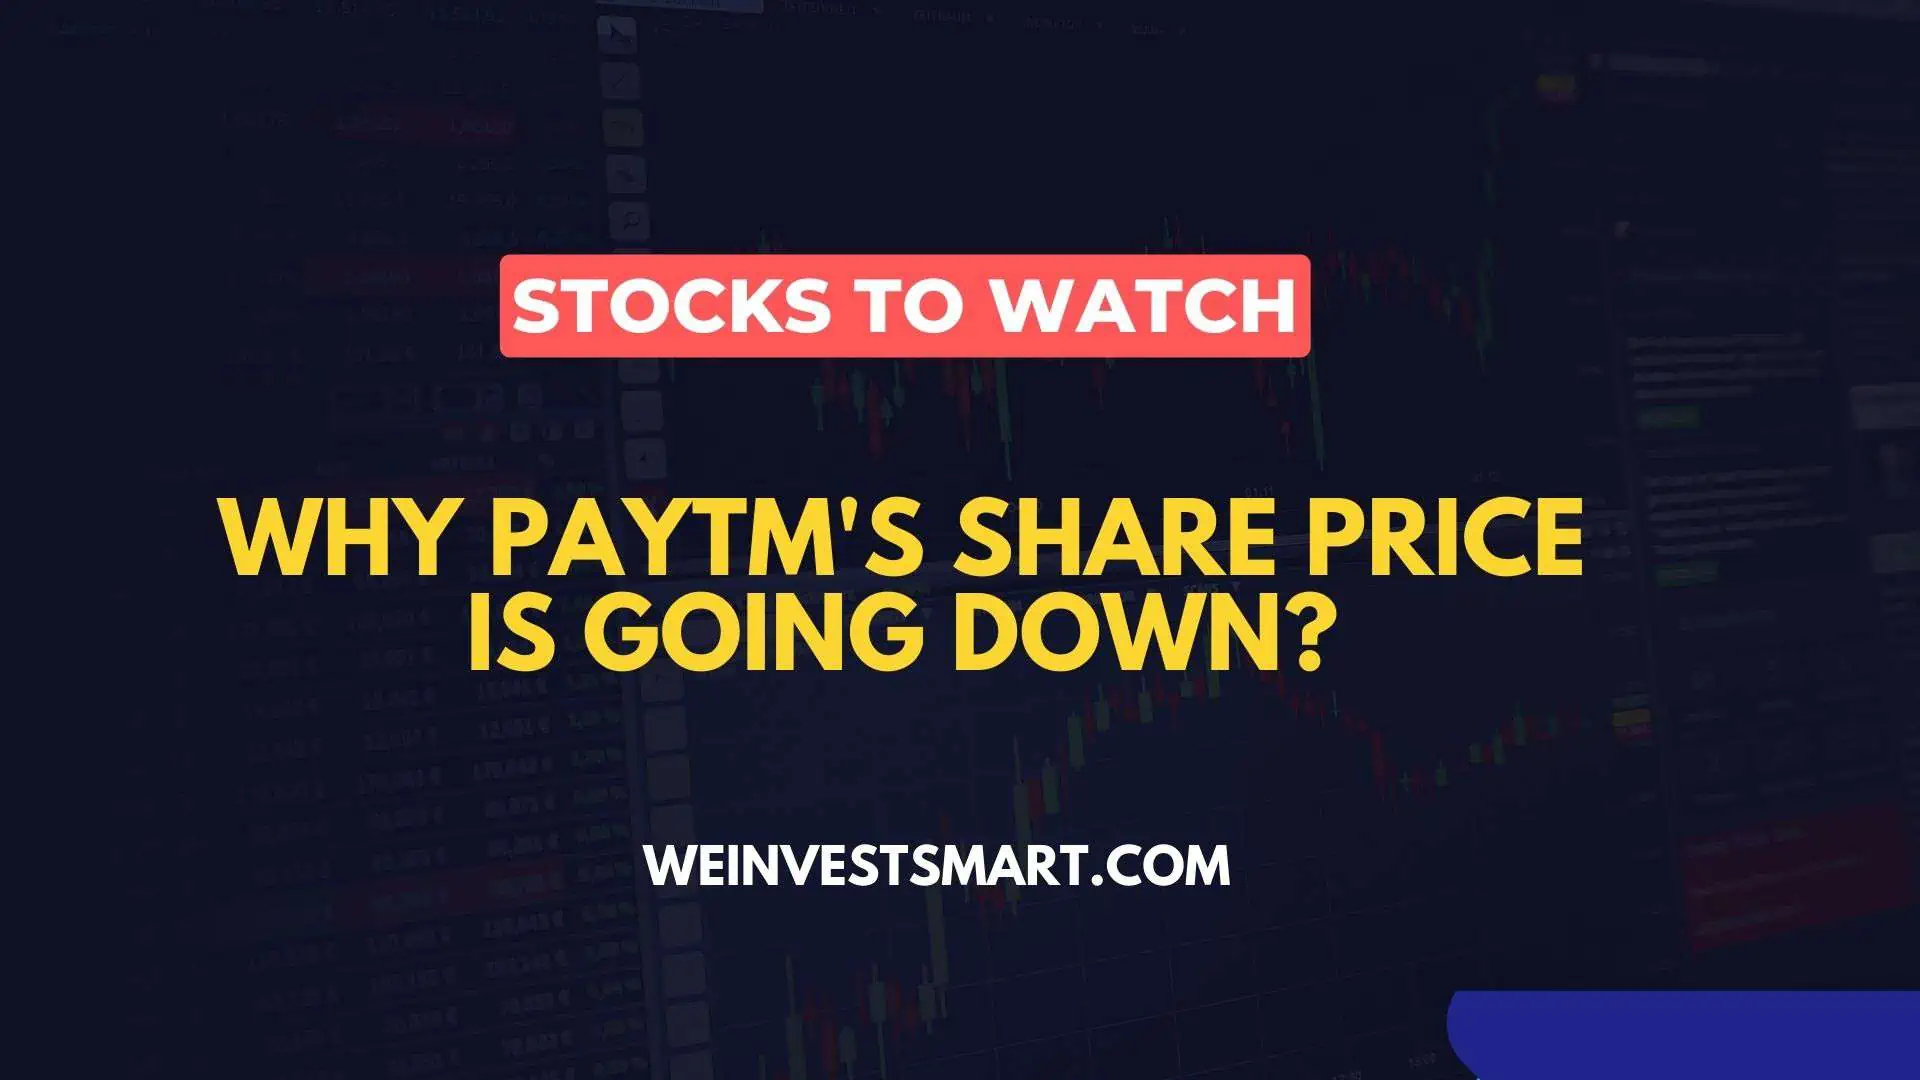 Why Paytm share price is going down and what lies in the future